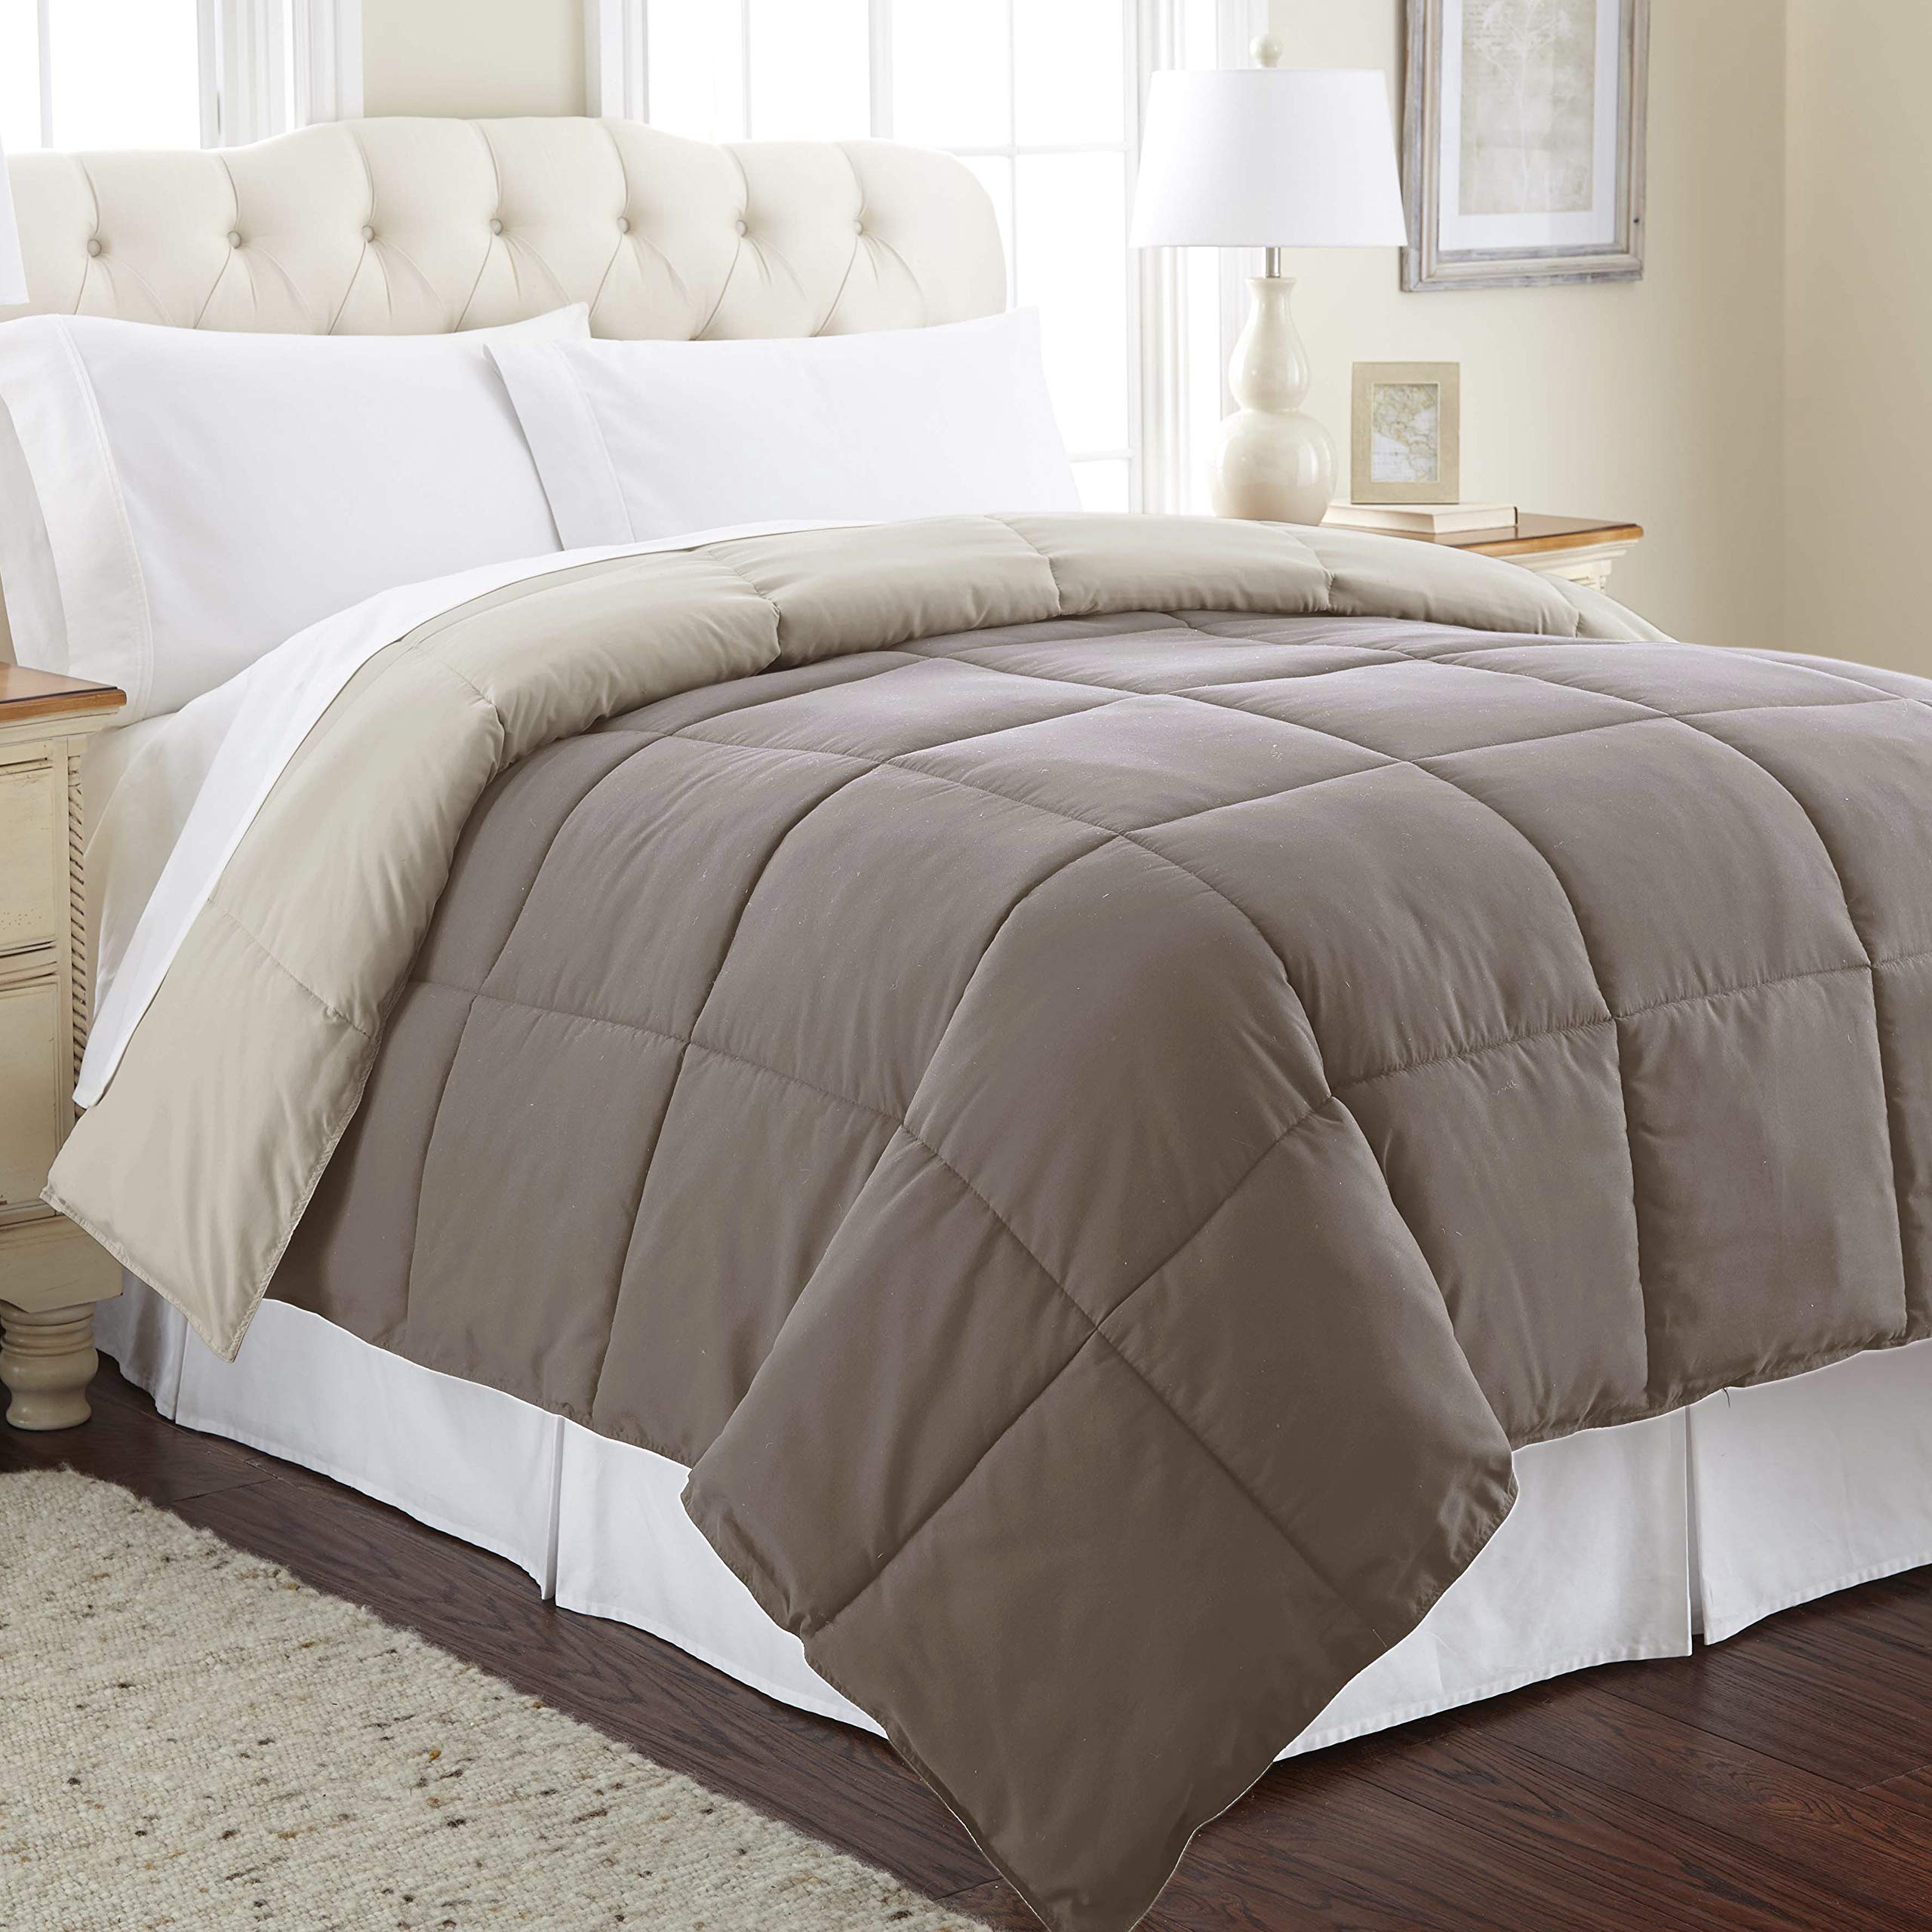 Book Cover Modern Threads Down Alternative Microfiber Quilted Reversible Comforter & Duvet Insert - Soft, Comfortable Alternative to Goose Down - Bedding for All Seasons Stone/Champagne Full/Queen Full/Queen Stone/Champagne